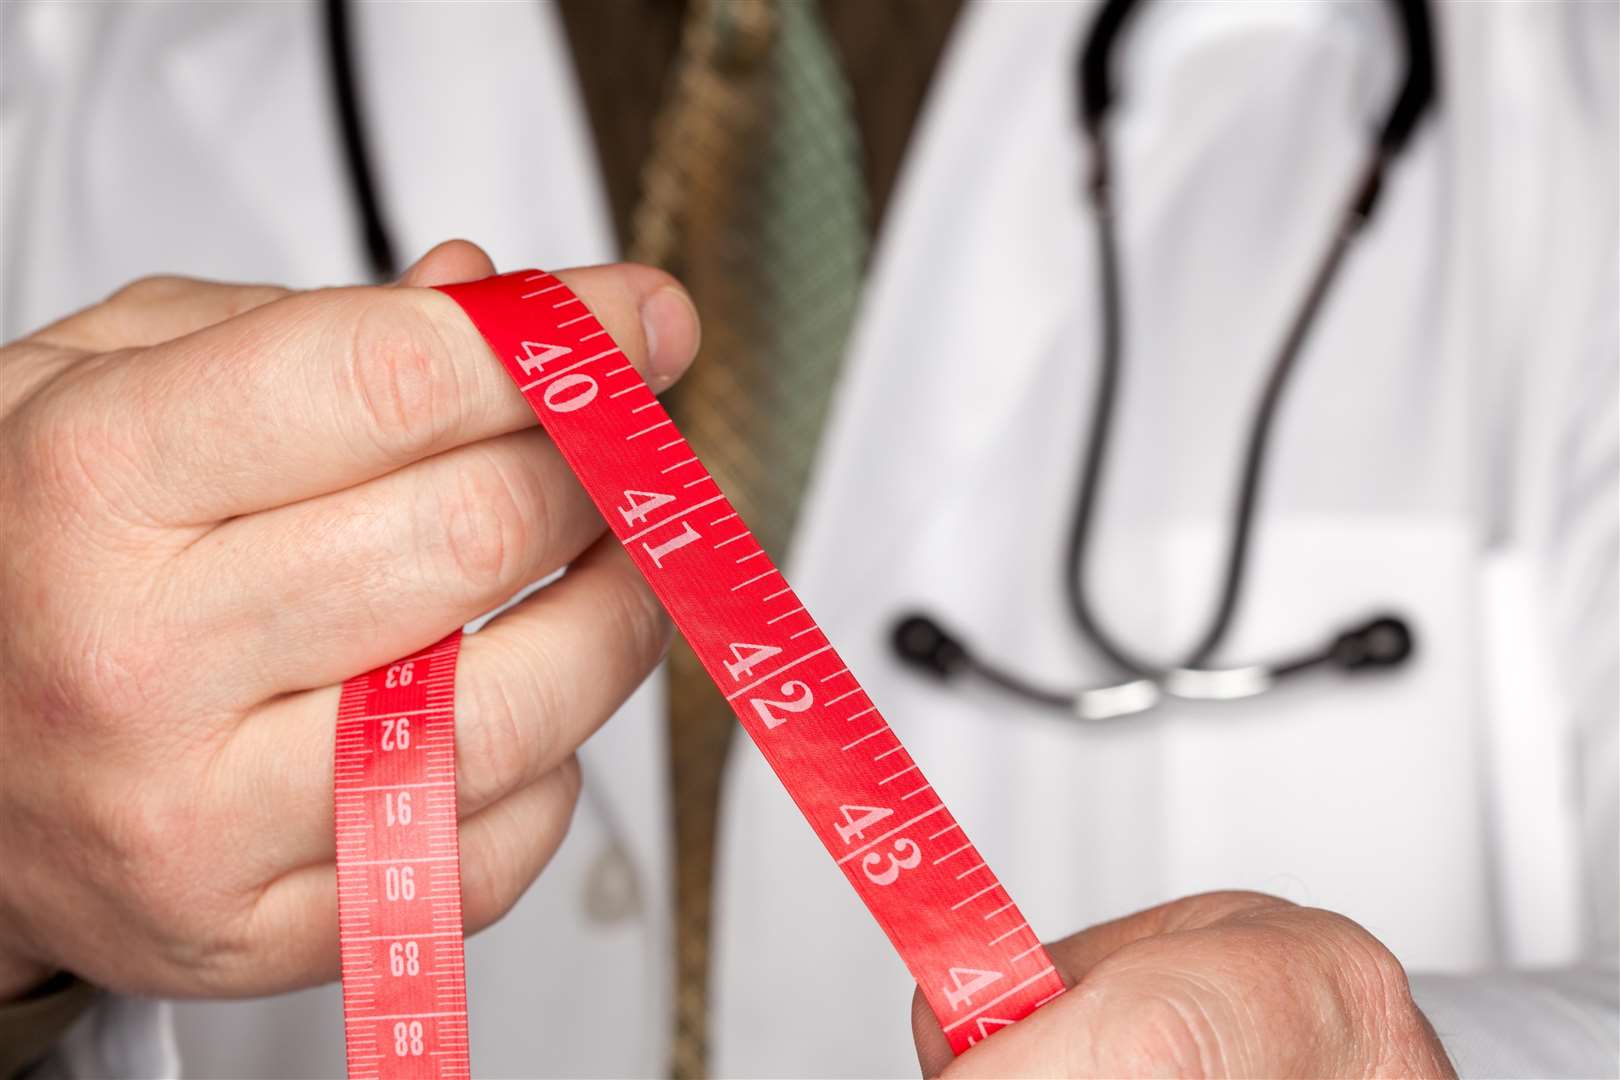 Kings Private Clinic gave patients unlicensed weight loss pills said the CQC. Picture: Thinkstock